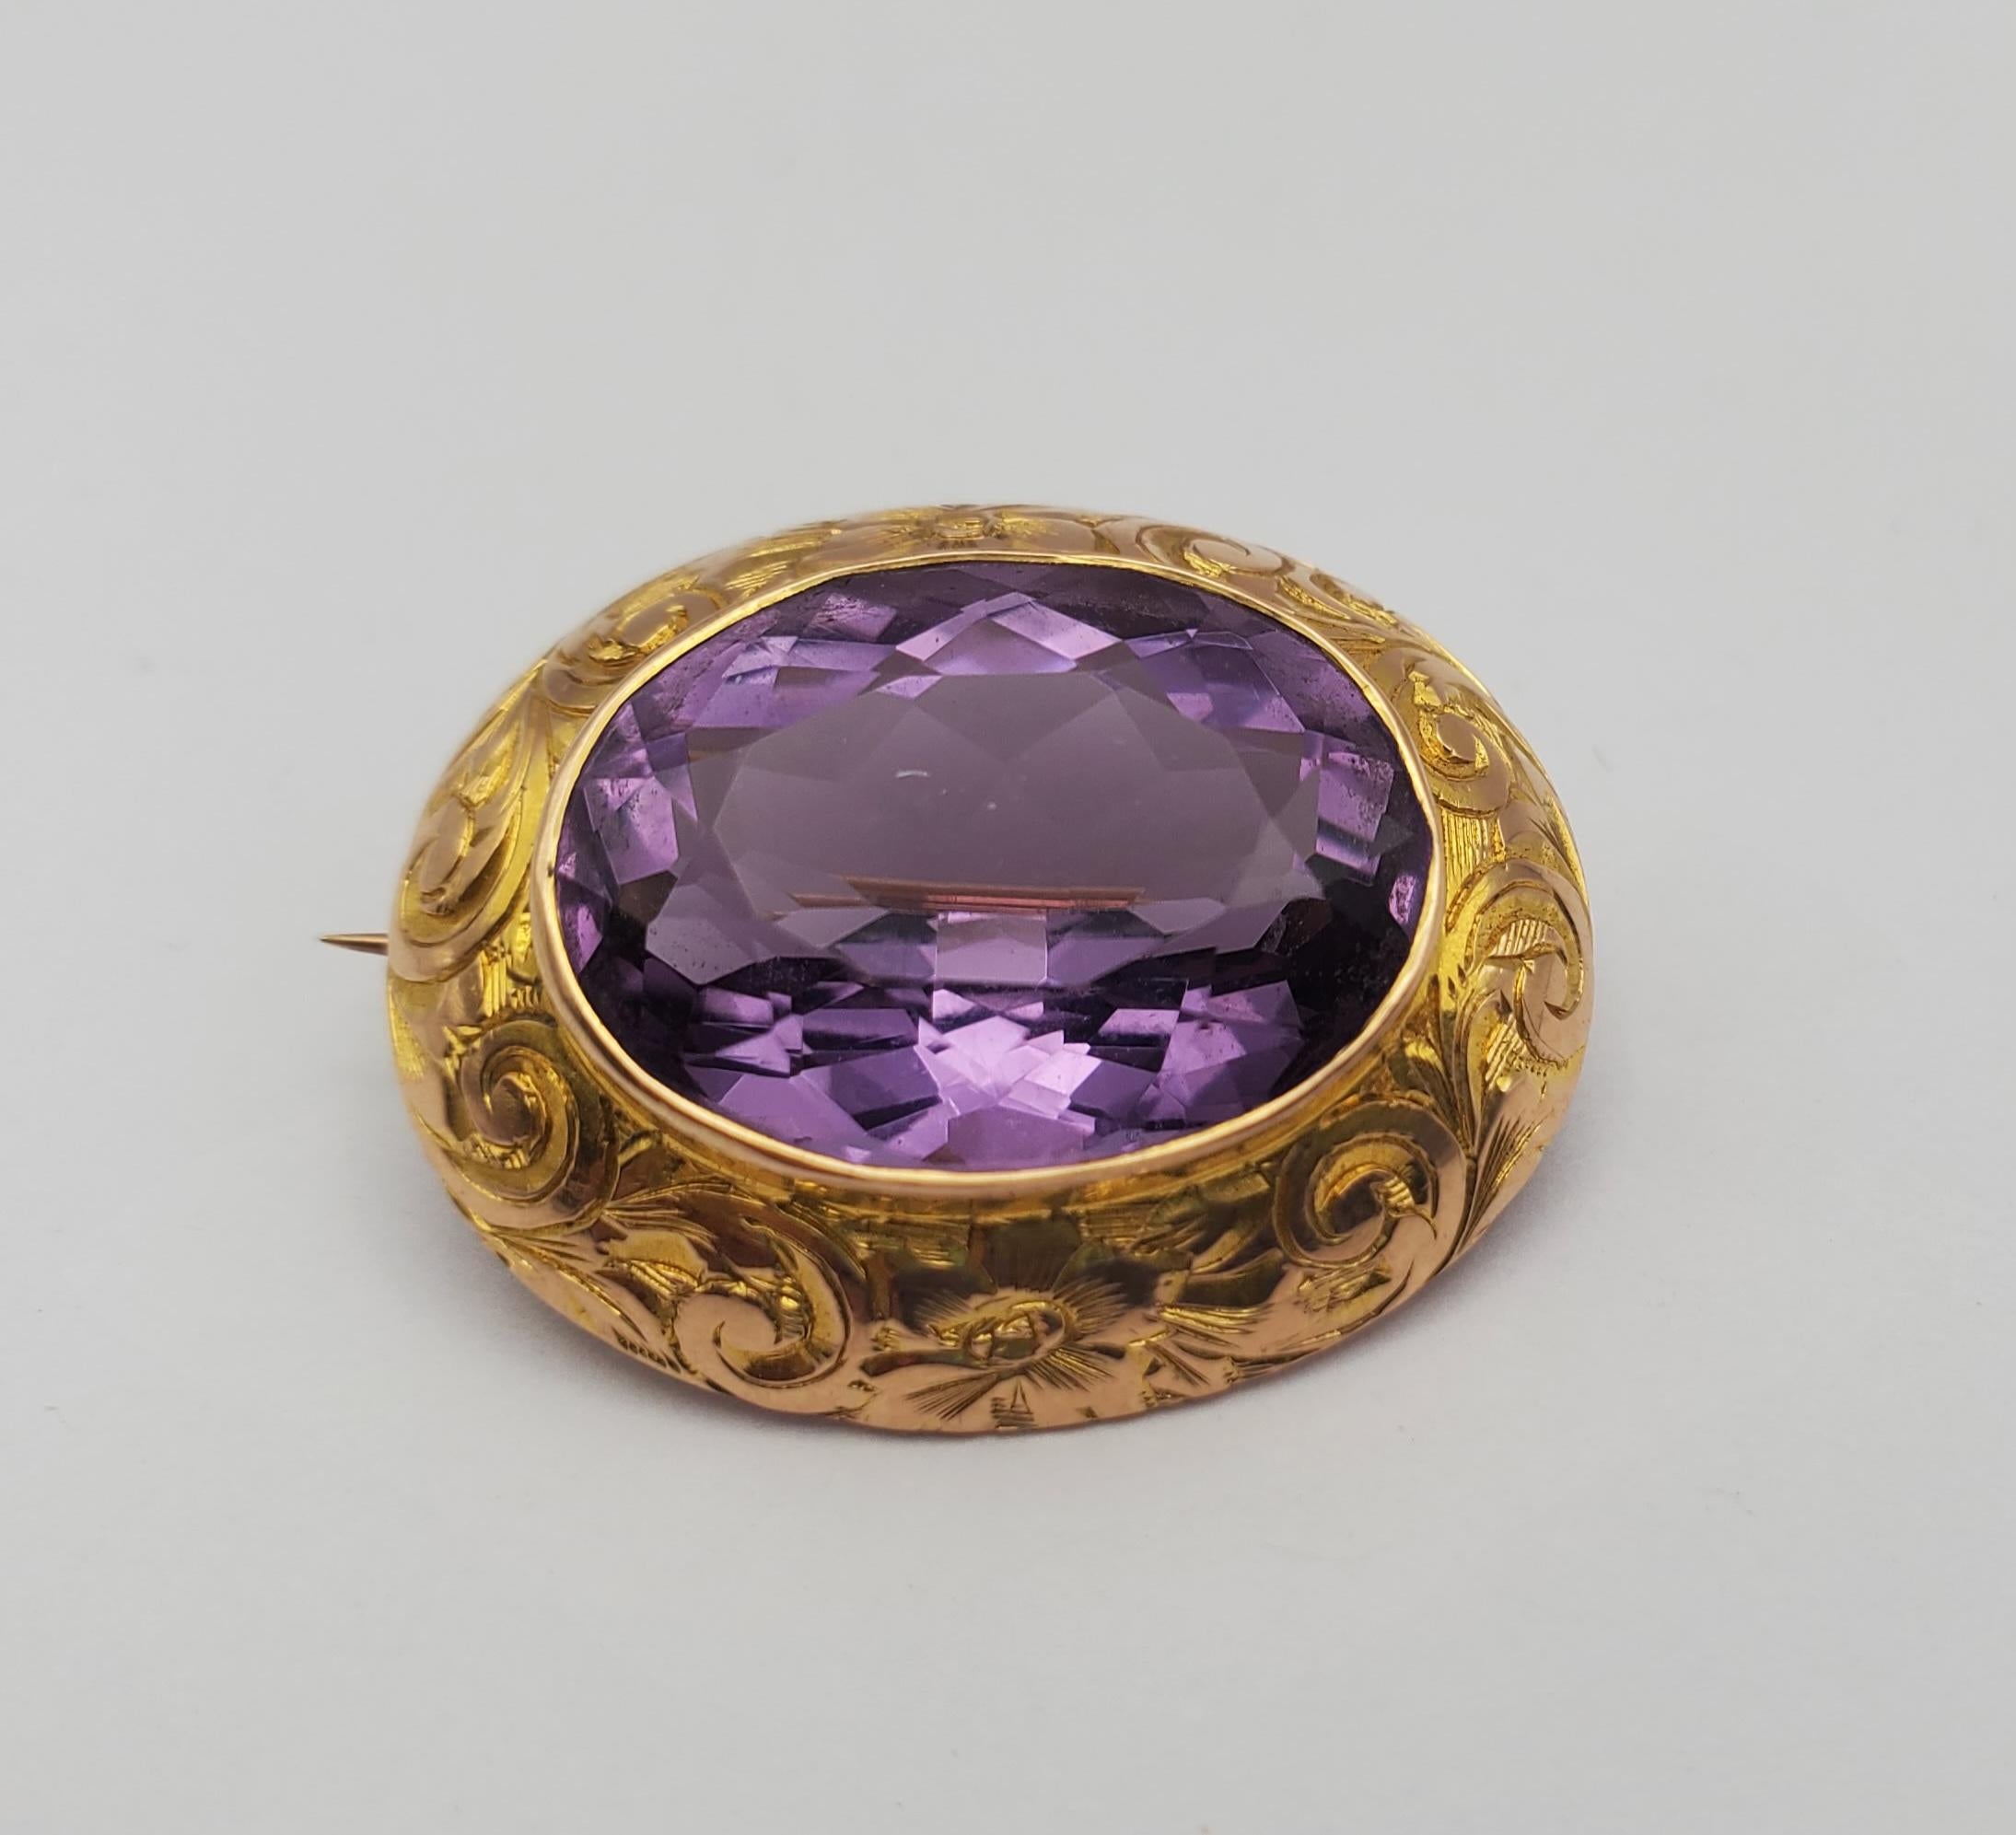 This striking amethyst brooch is an estate piece originating from the late nineteenth to early twentieth century. The setting is 14k yellow gold featuring a beautifully cut oval center stone. The stone is bezel set and the setting features a